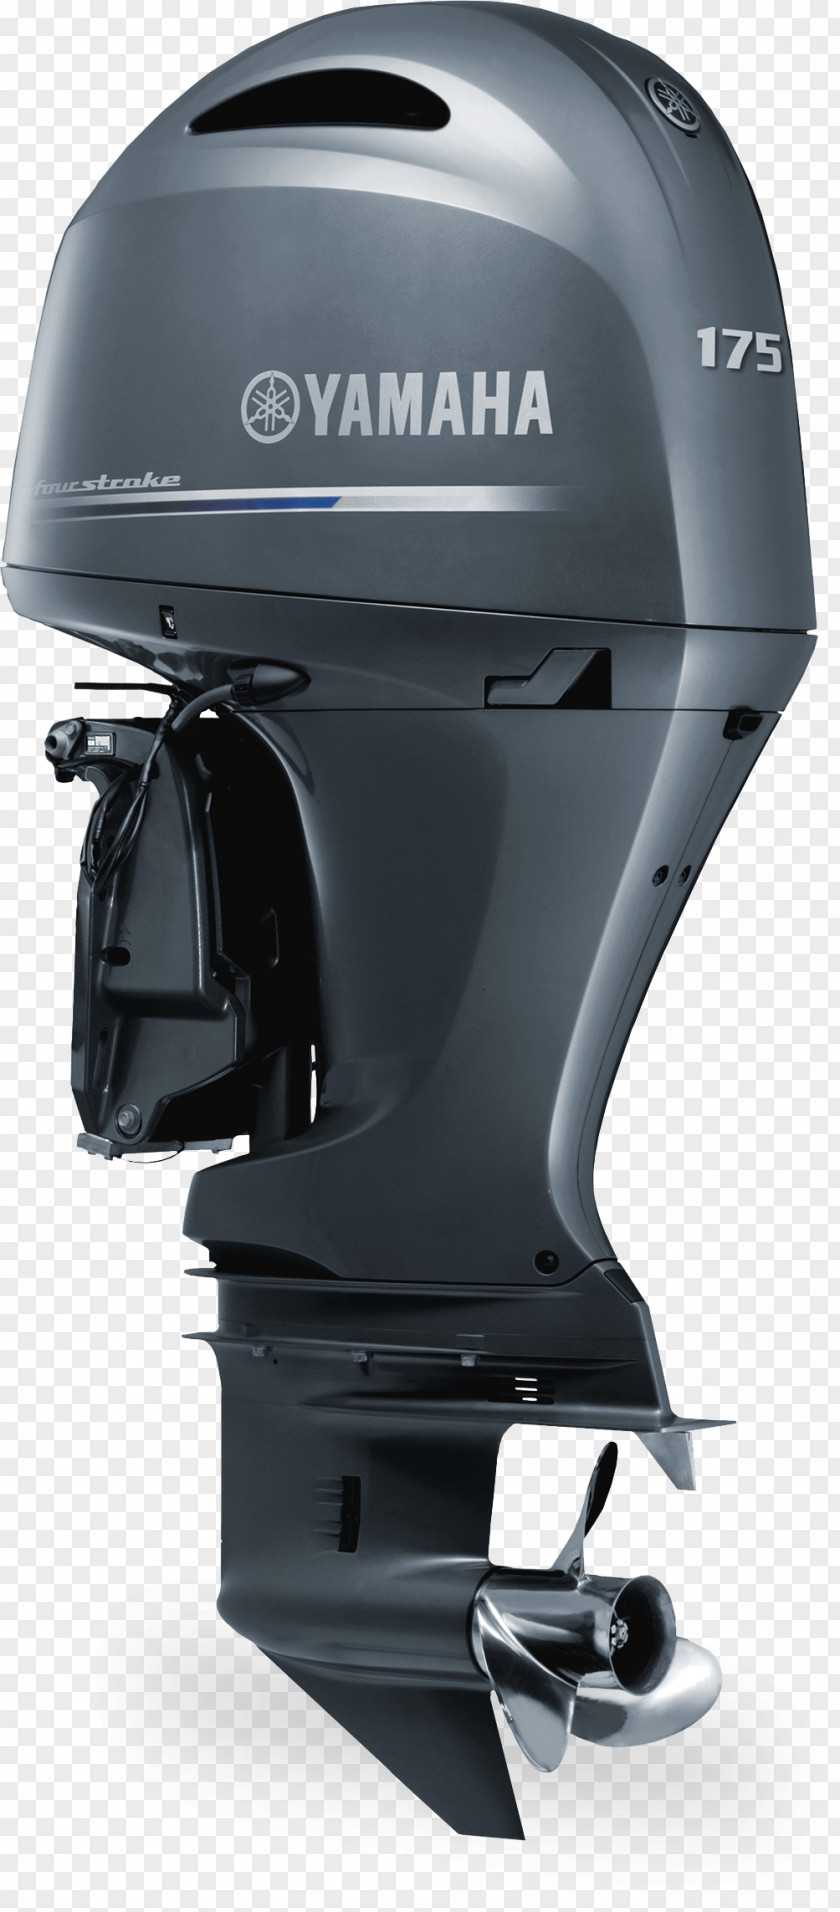 Yamaha Rd350 Motor Company Outboard Four-stroke Engine Boat PNG